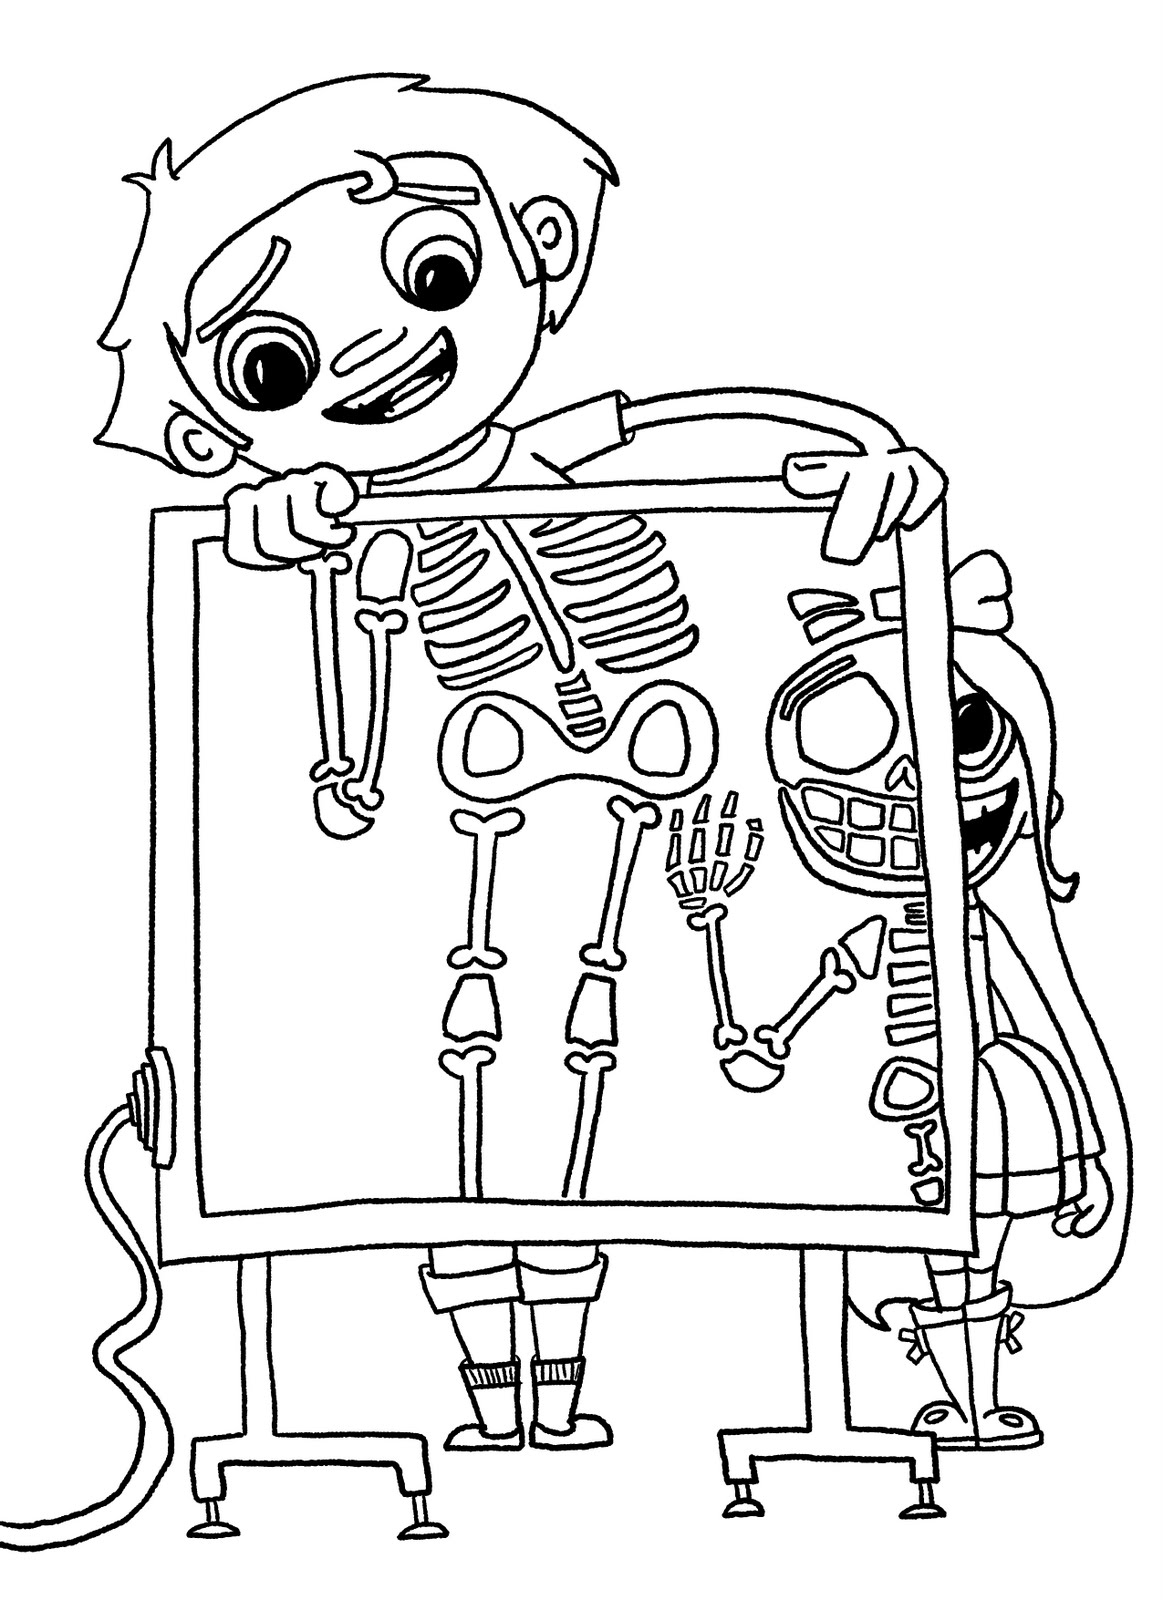 X Ray Time - X Ray Sketch. 